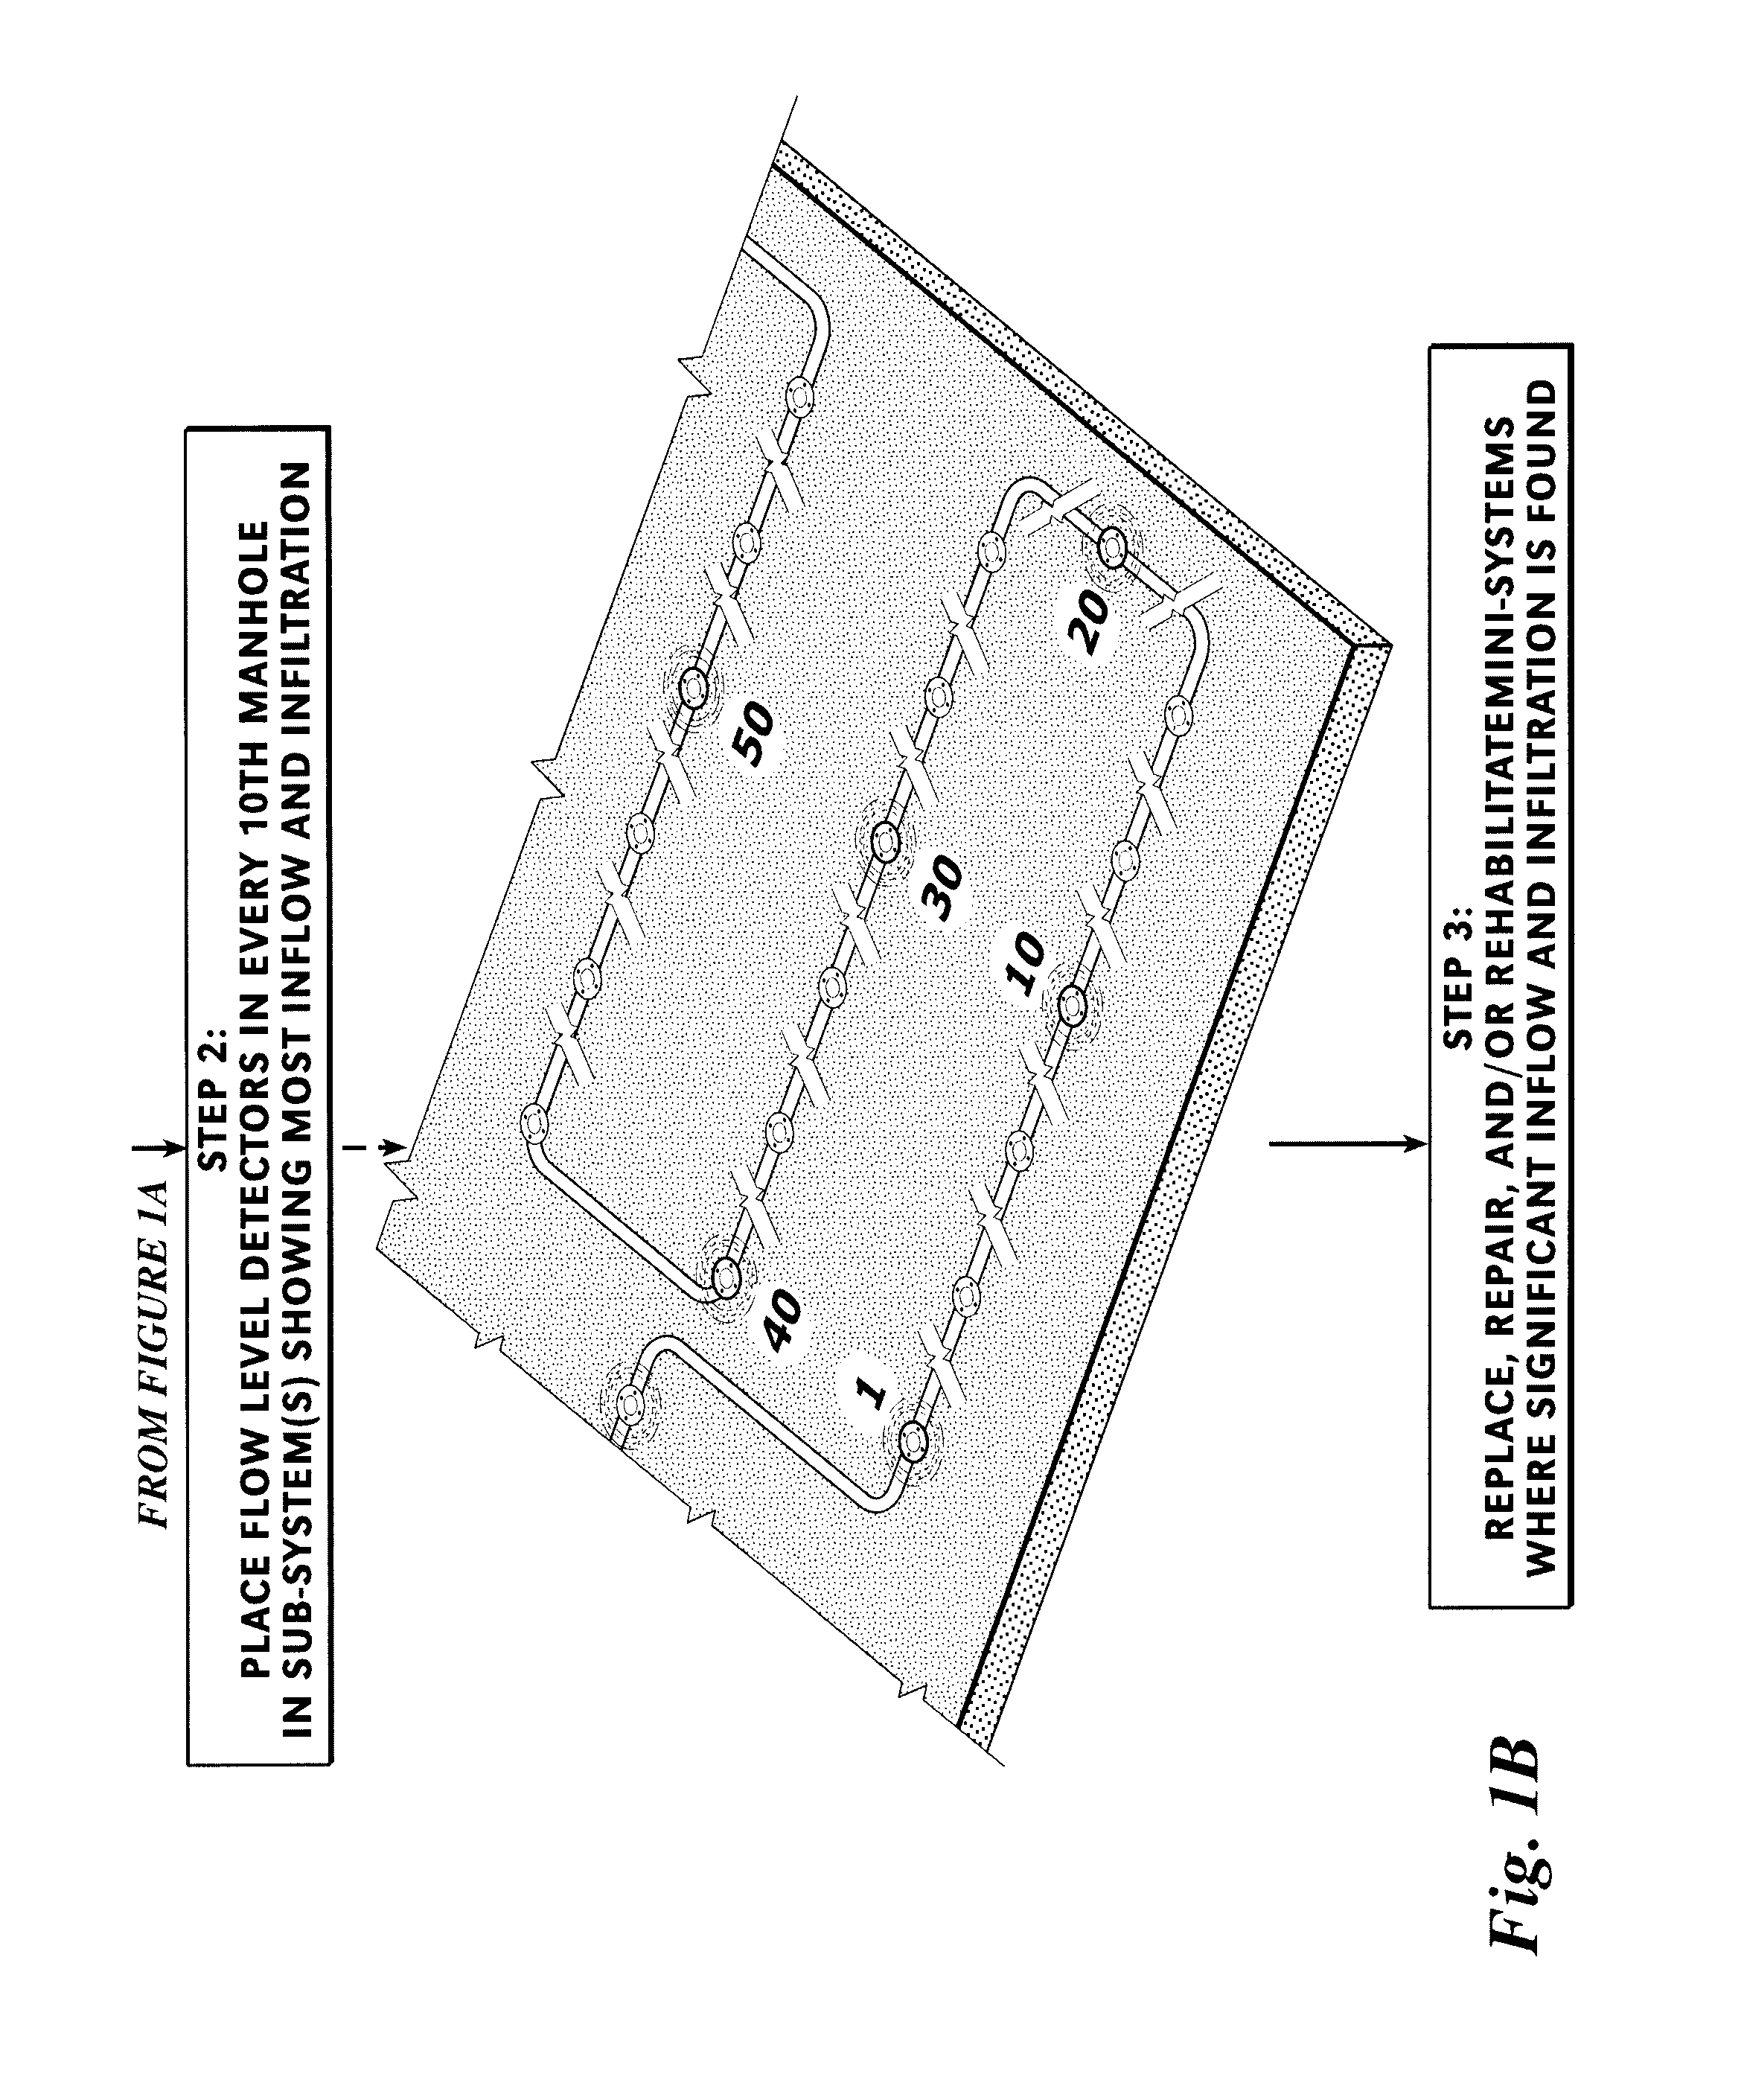 Method of wastewater flow measurement, system analysis, and improvement